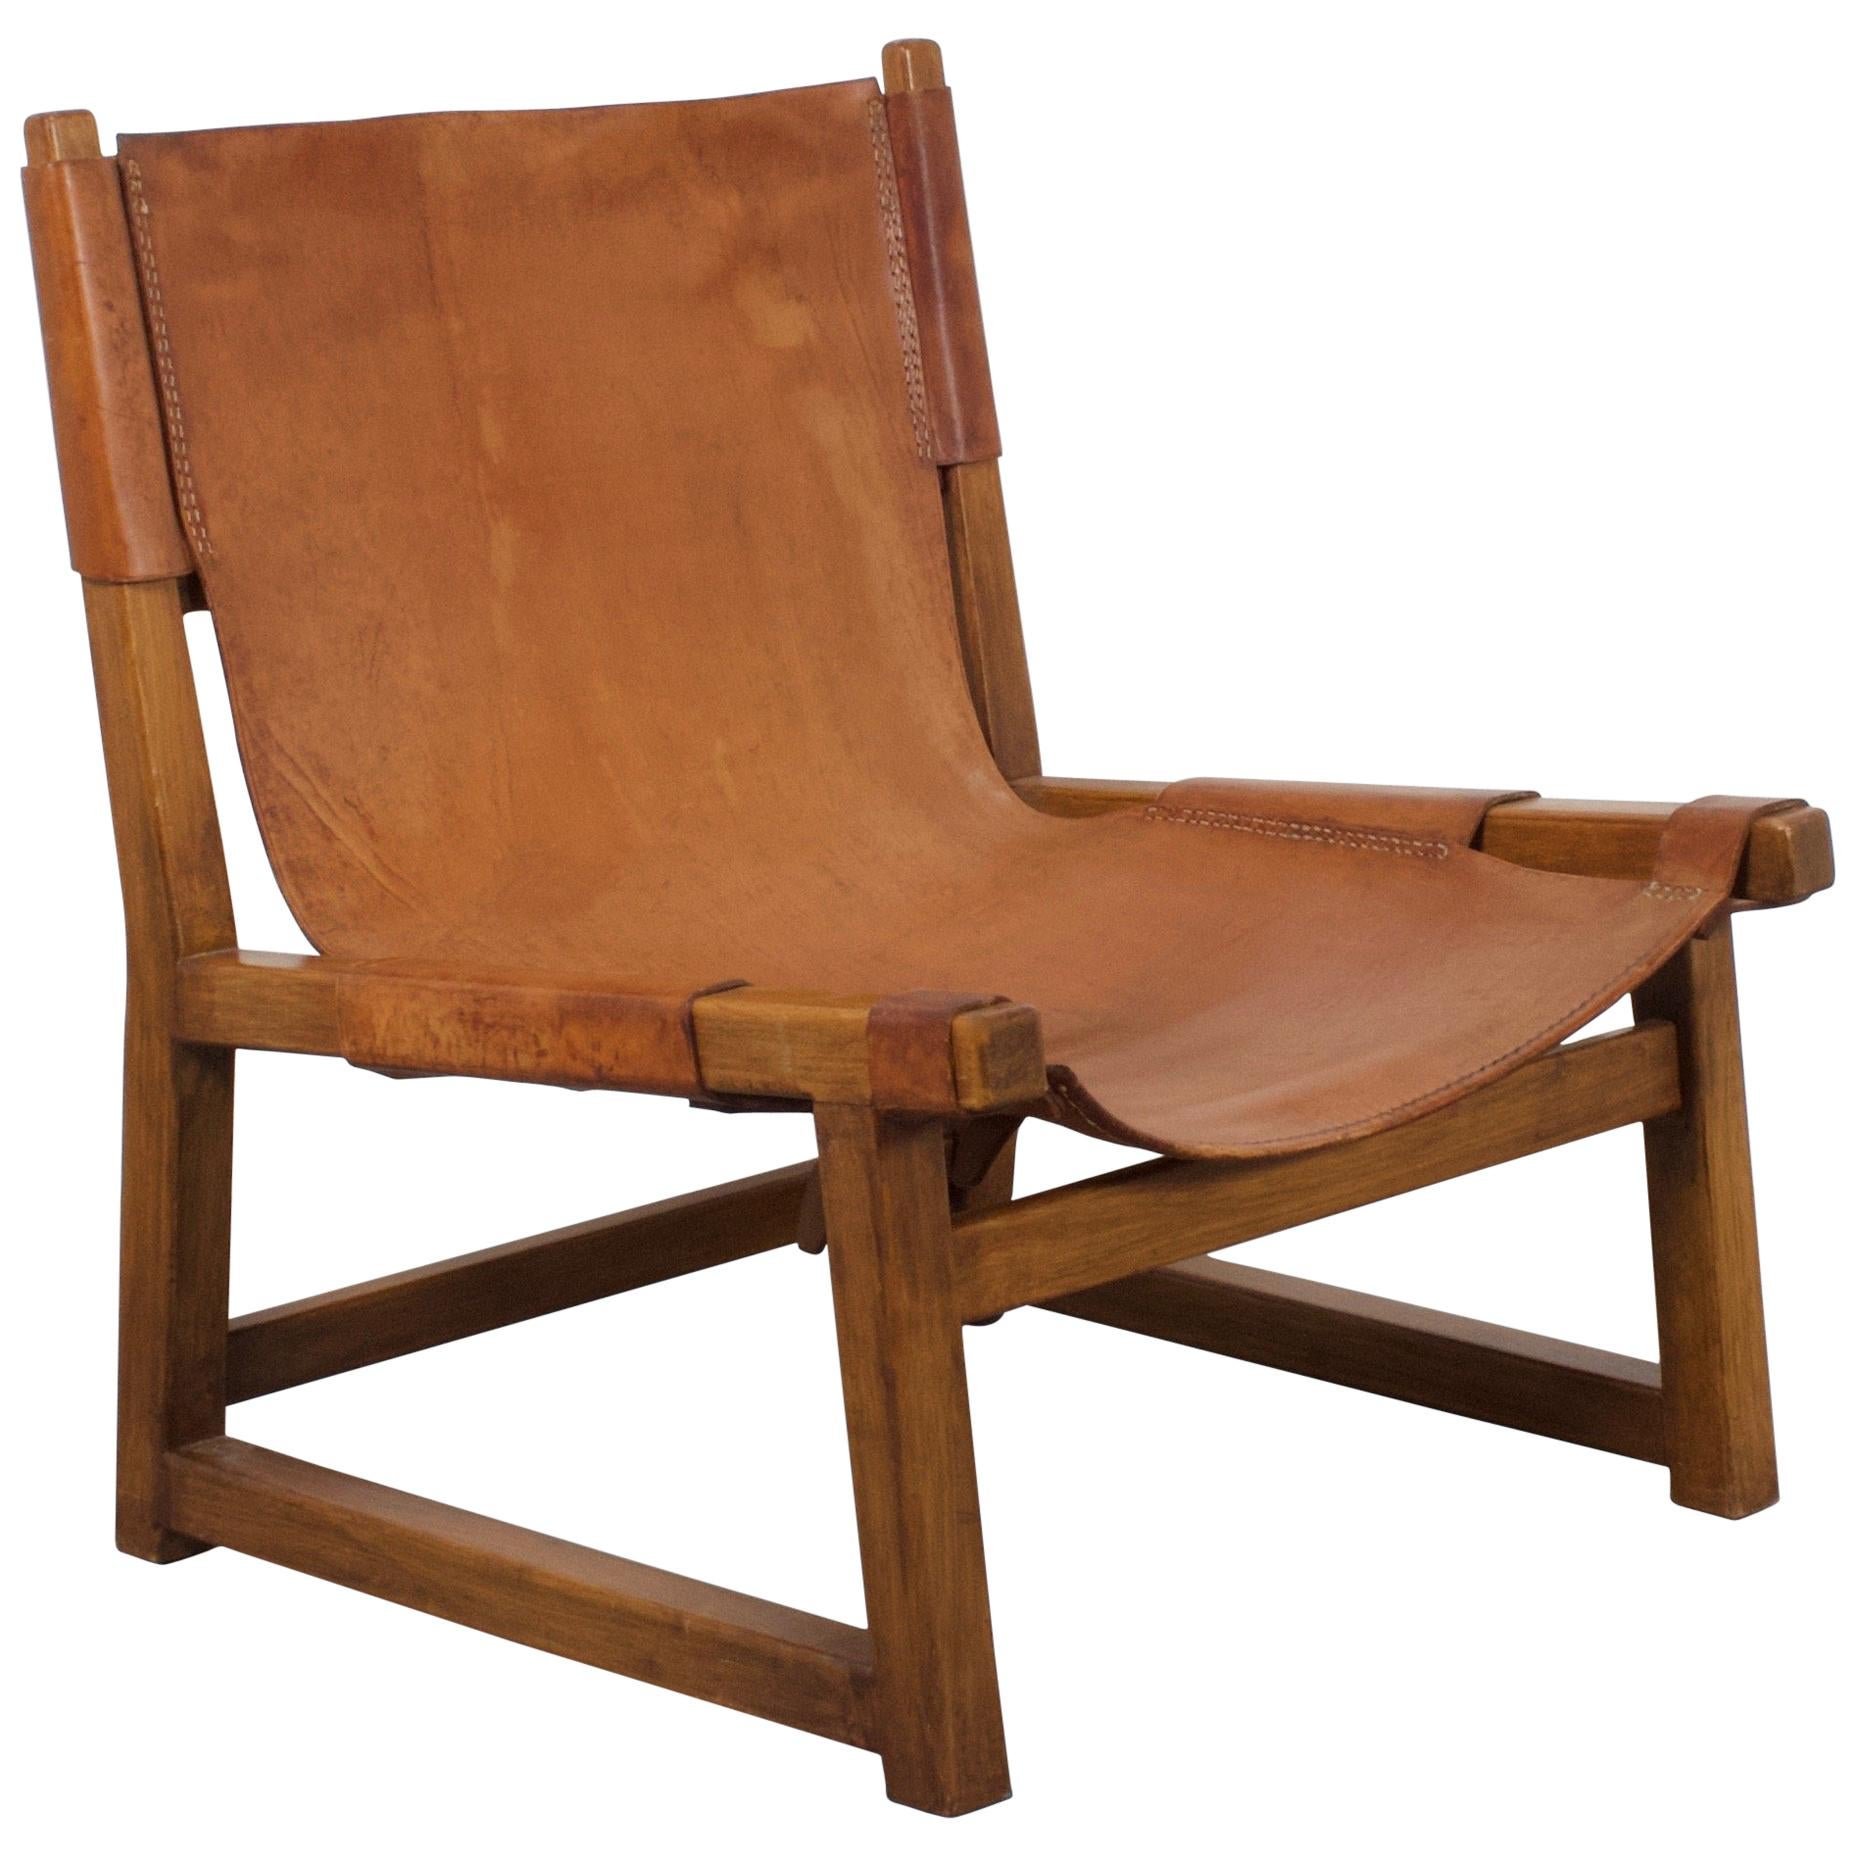 Hunting Chair in Solid Oak and Cognac Leather by Paco Muñoz, 1950s